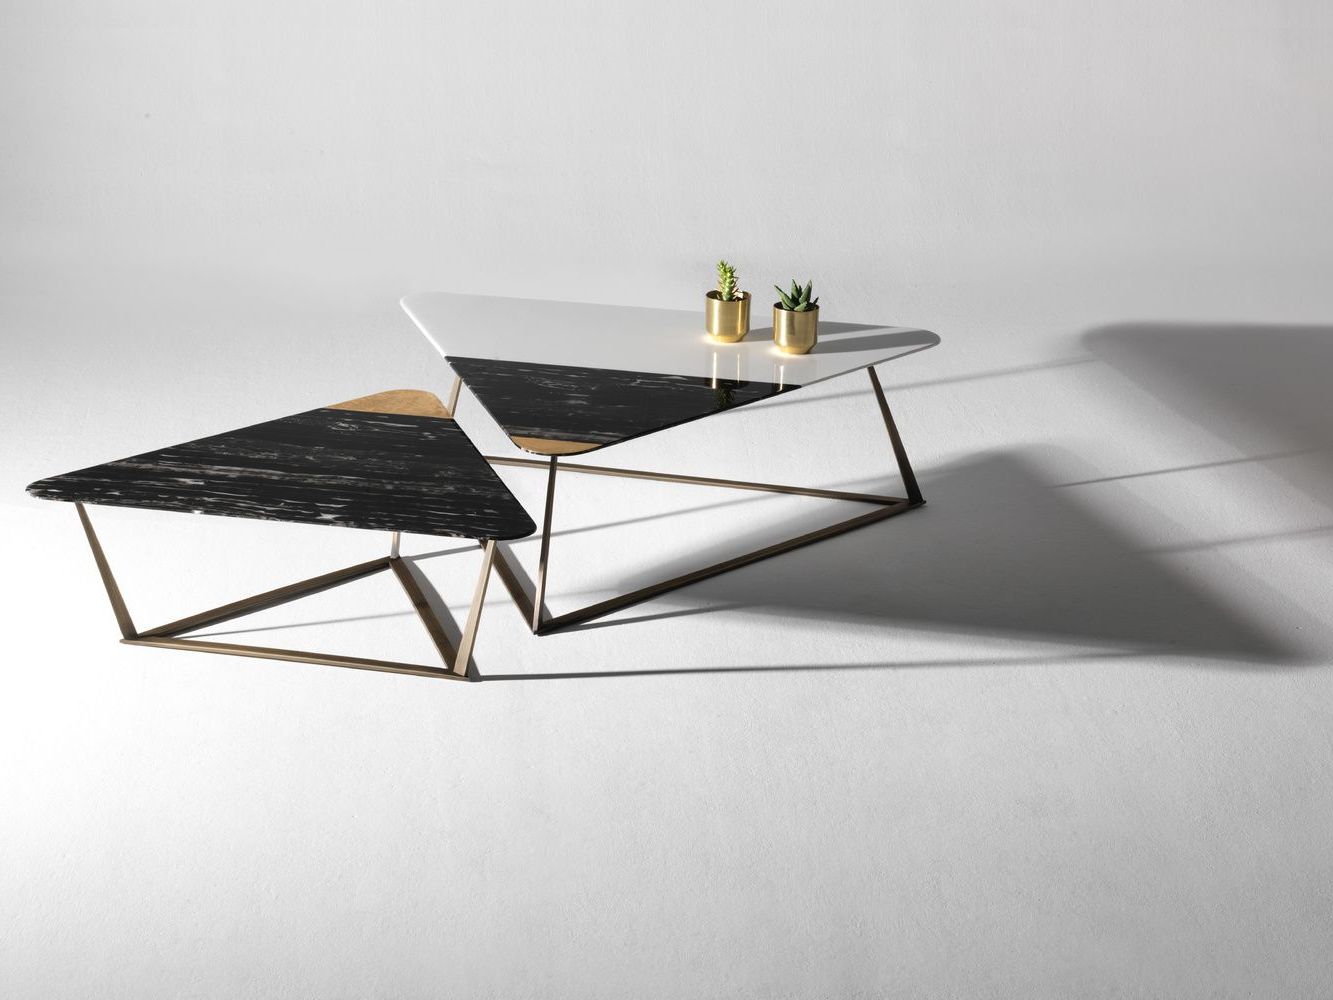 Trendy Set Of Triangle Marble Tables, Port Black And White With Regard To White Geometric Coffee Tables (View 19 of 20)